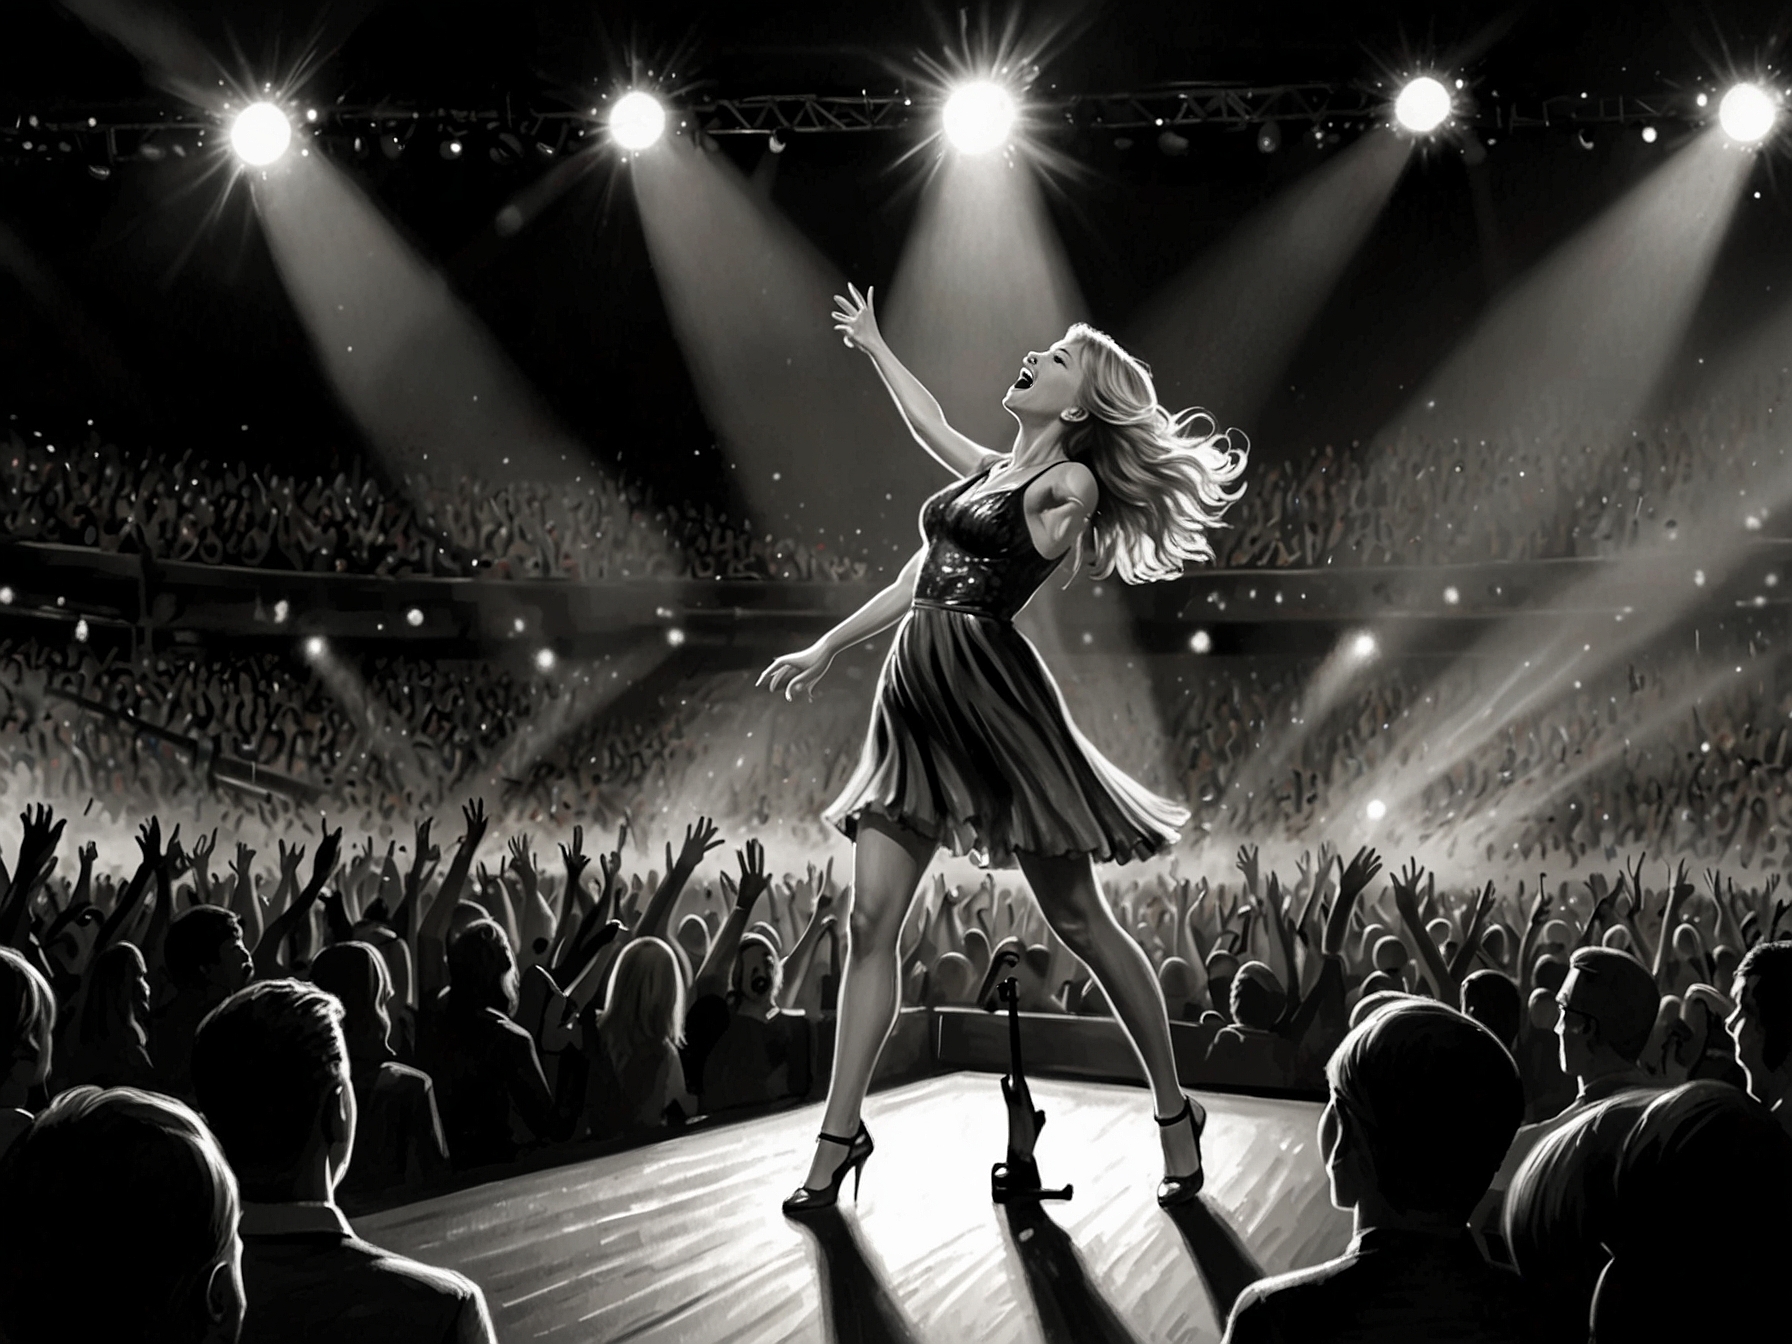 Taylor Swift performing on stage, capturing the excitement and energy of The Eras Tour, with thousands of fans in the audience.